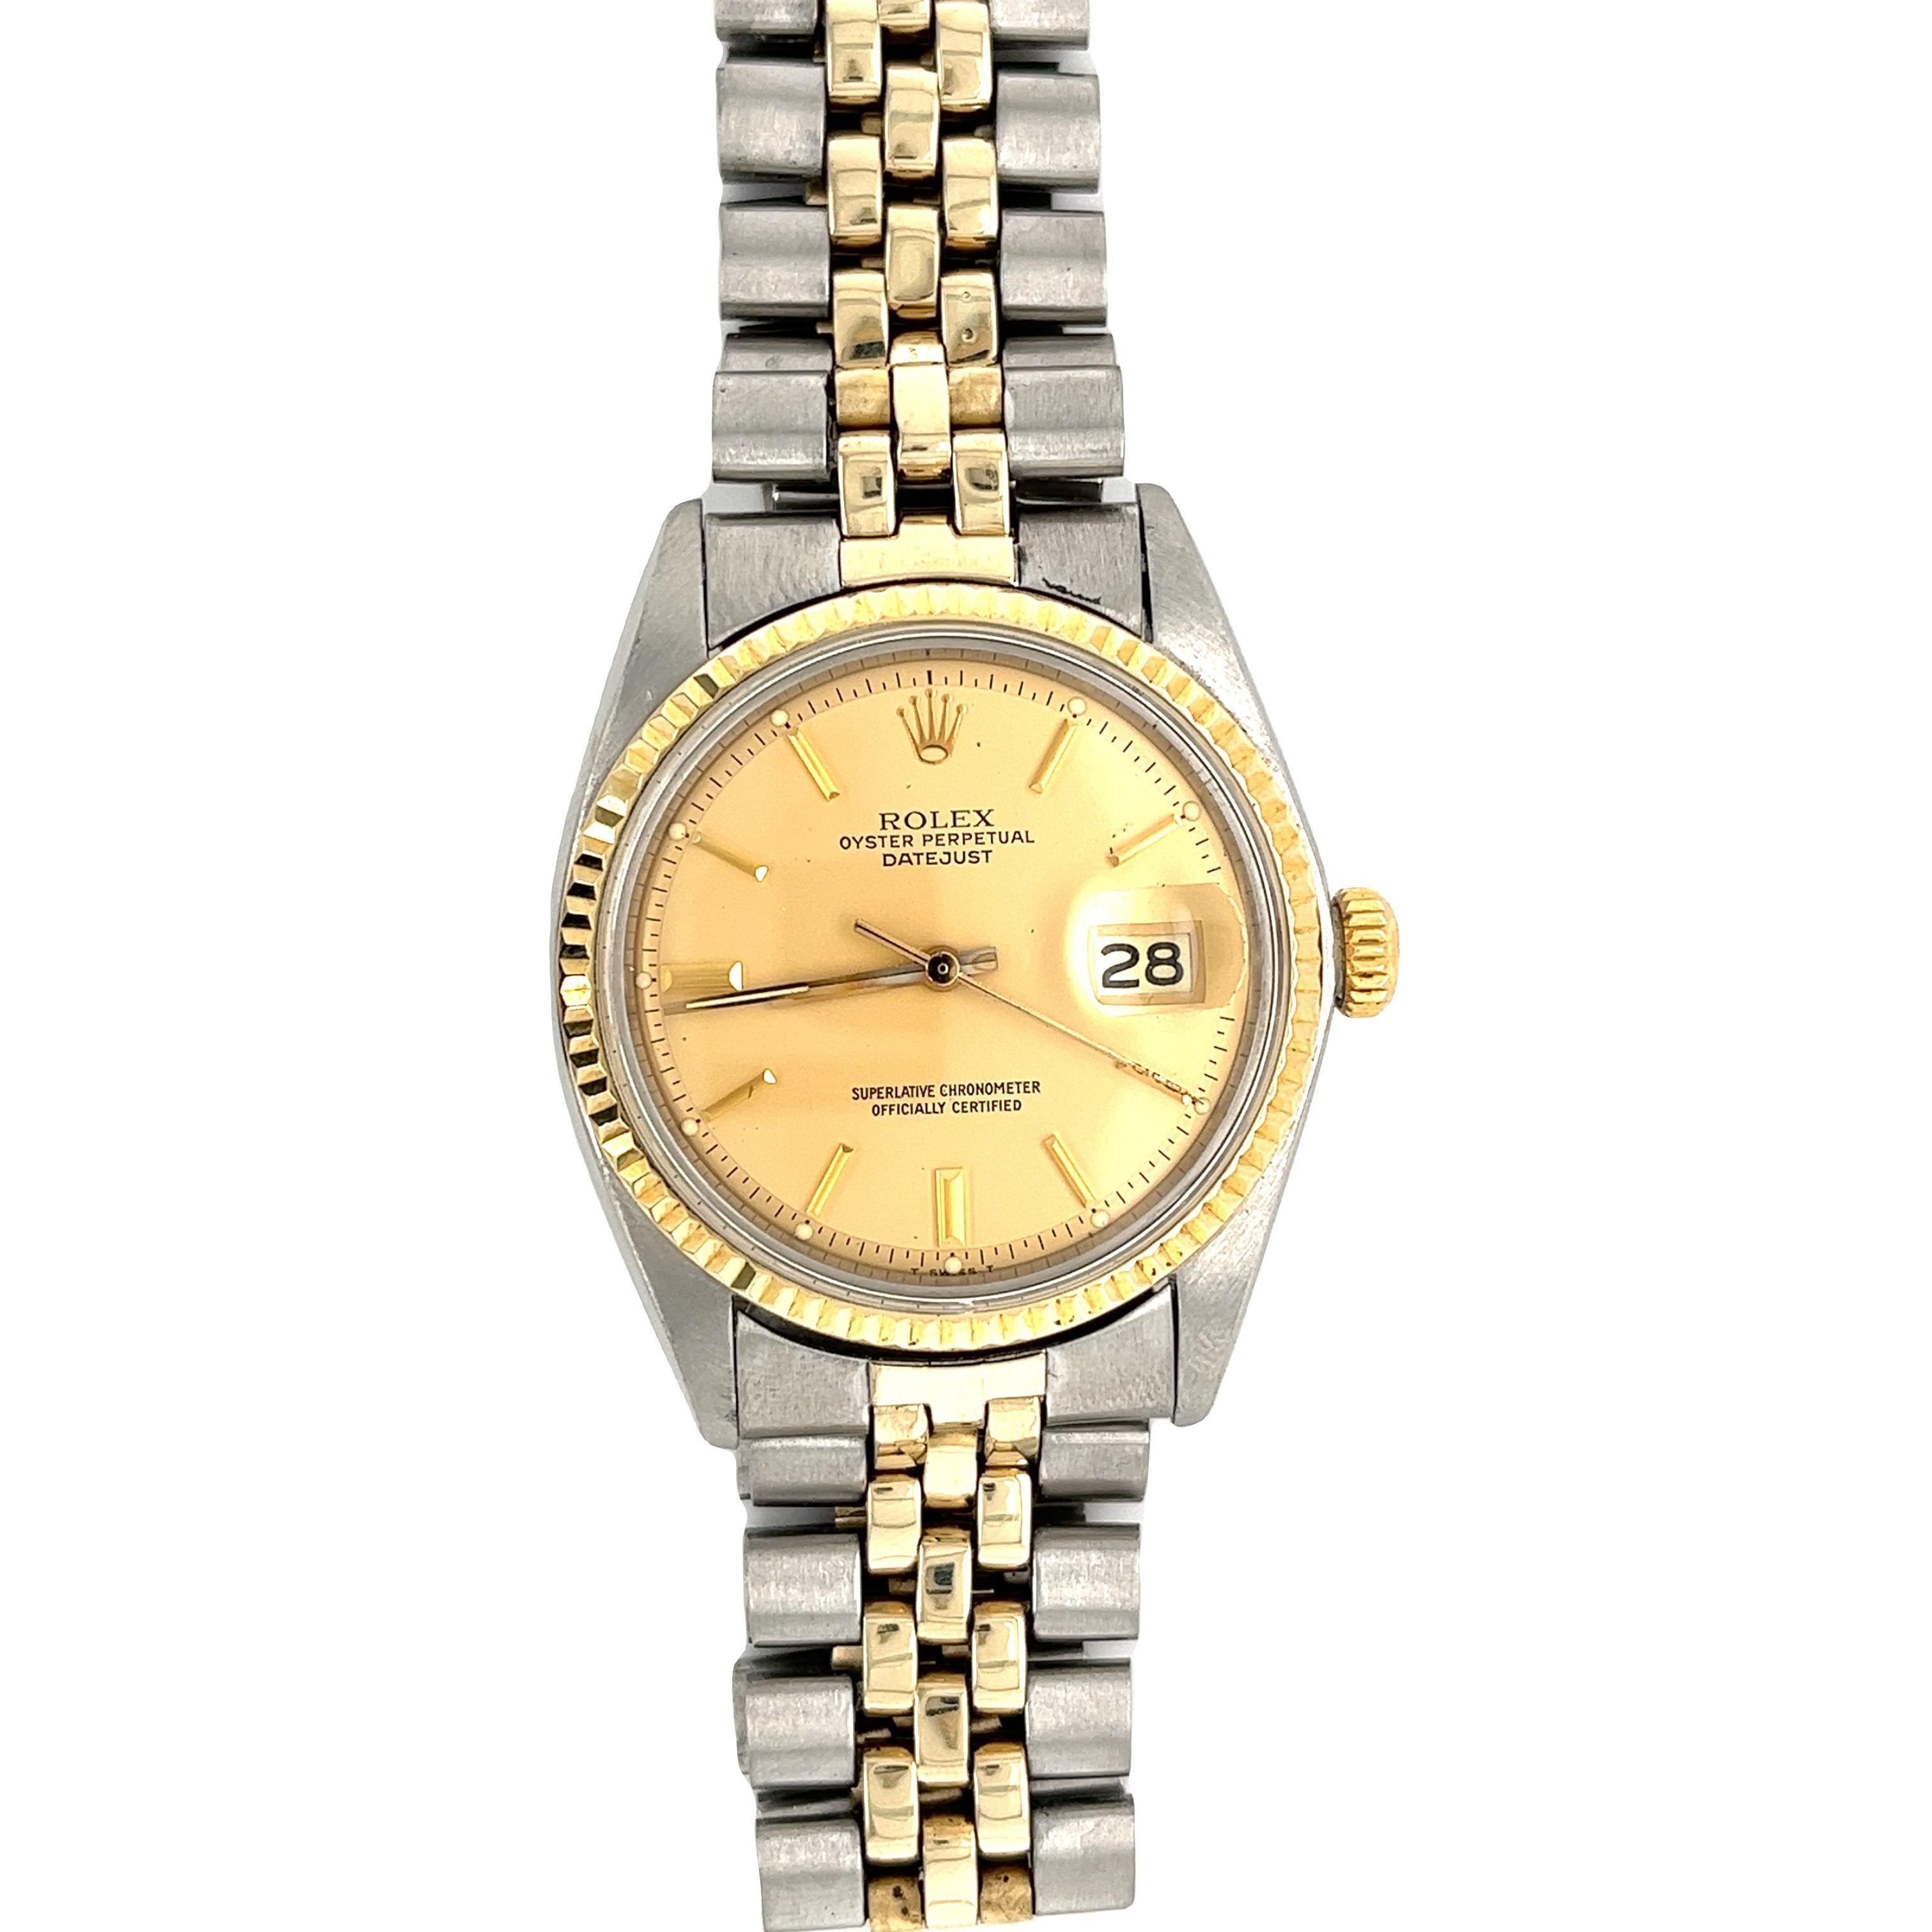 Vintage Rolex Datejust Two Tone Watch with Jubilee Bracelet In Good Condition For Sale In Miami, FL